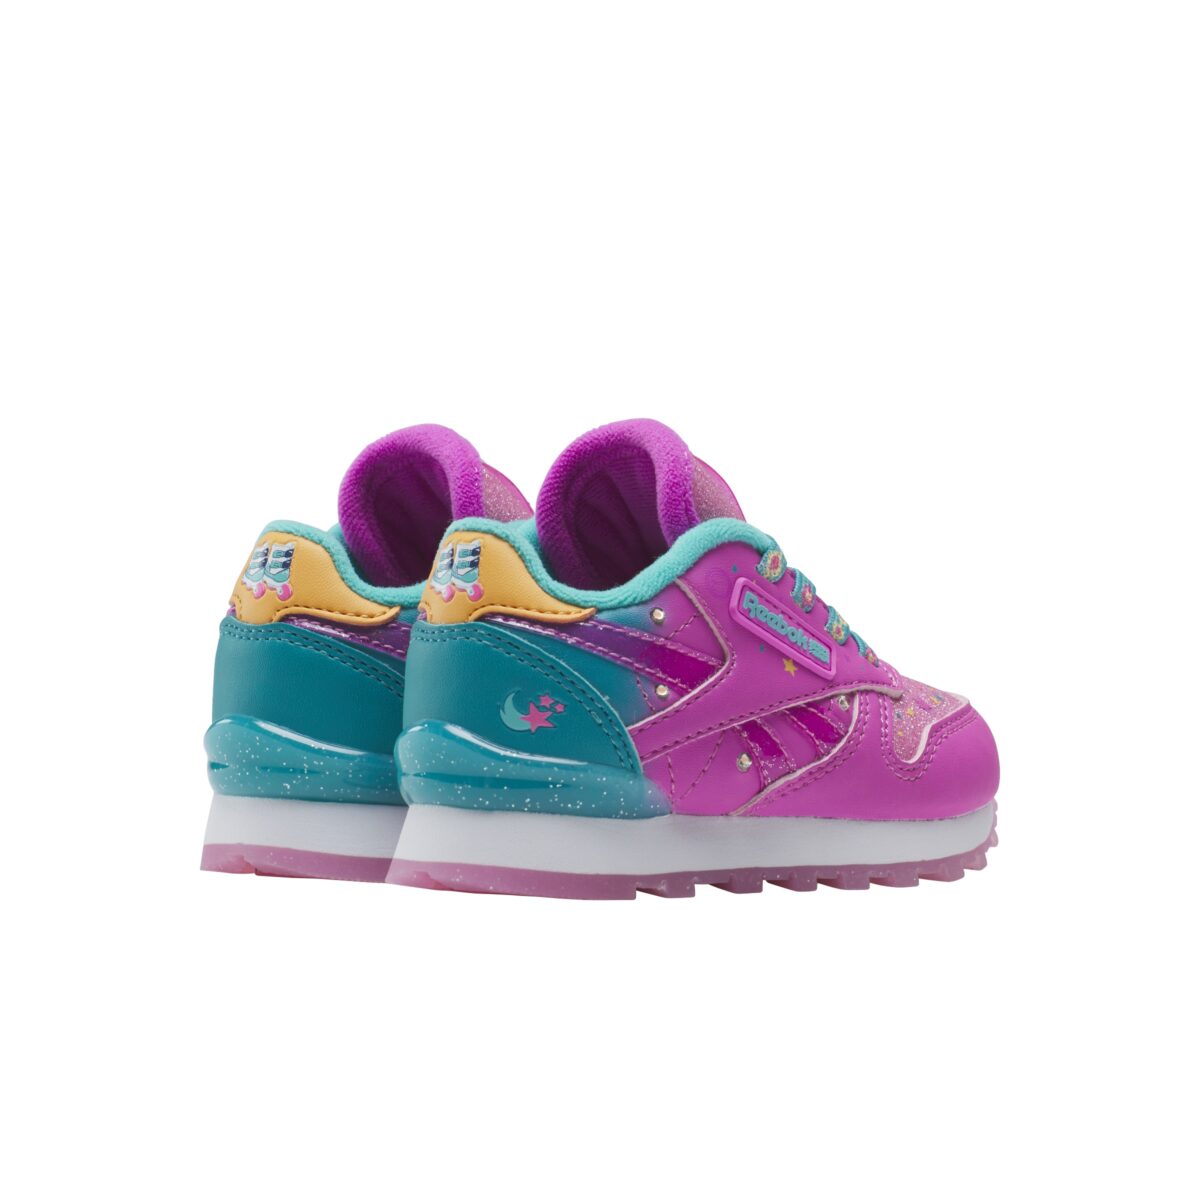 My Little Pony x Reebok Classic Leather Collection